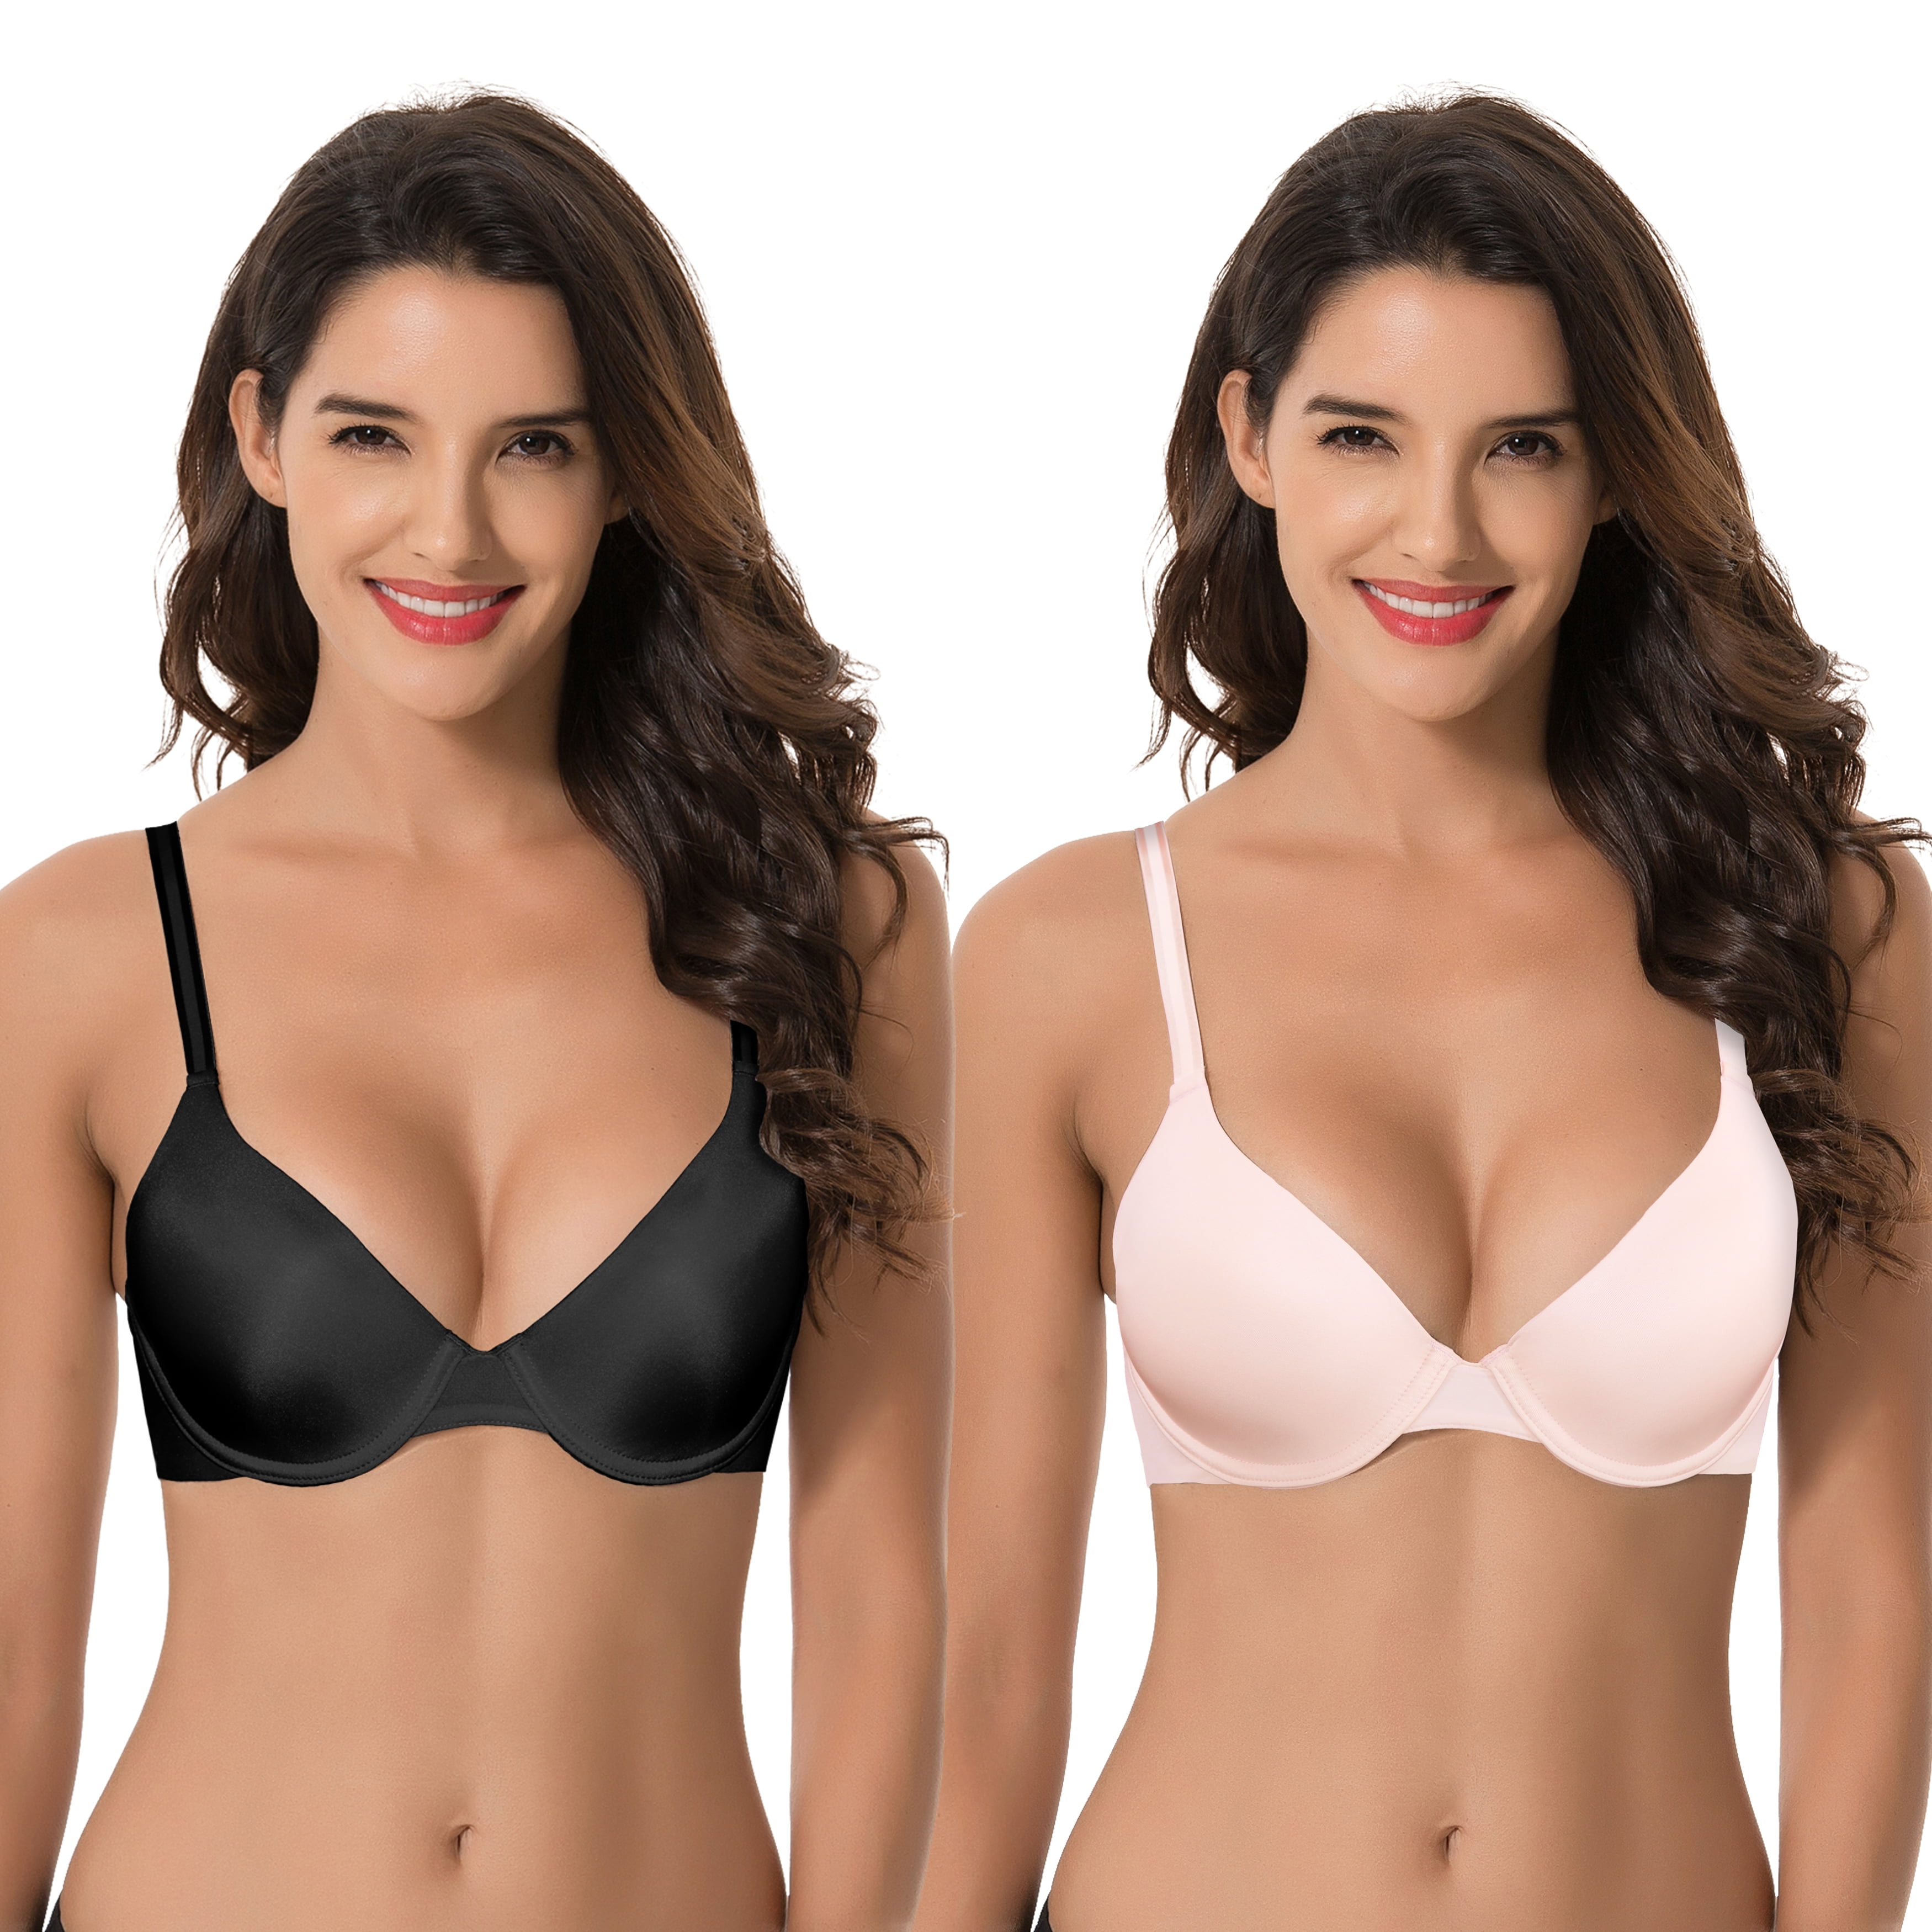 Curve Muse Women's Plus Size Full Coverage Padded Underwire  Bra-2PK-Black,Pink-32DDD